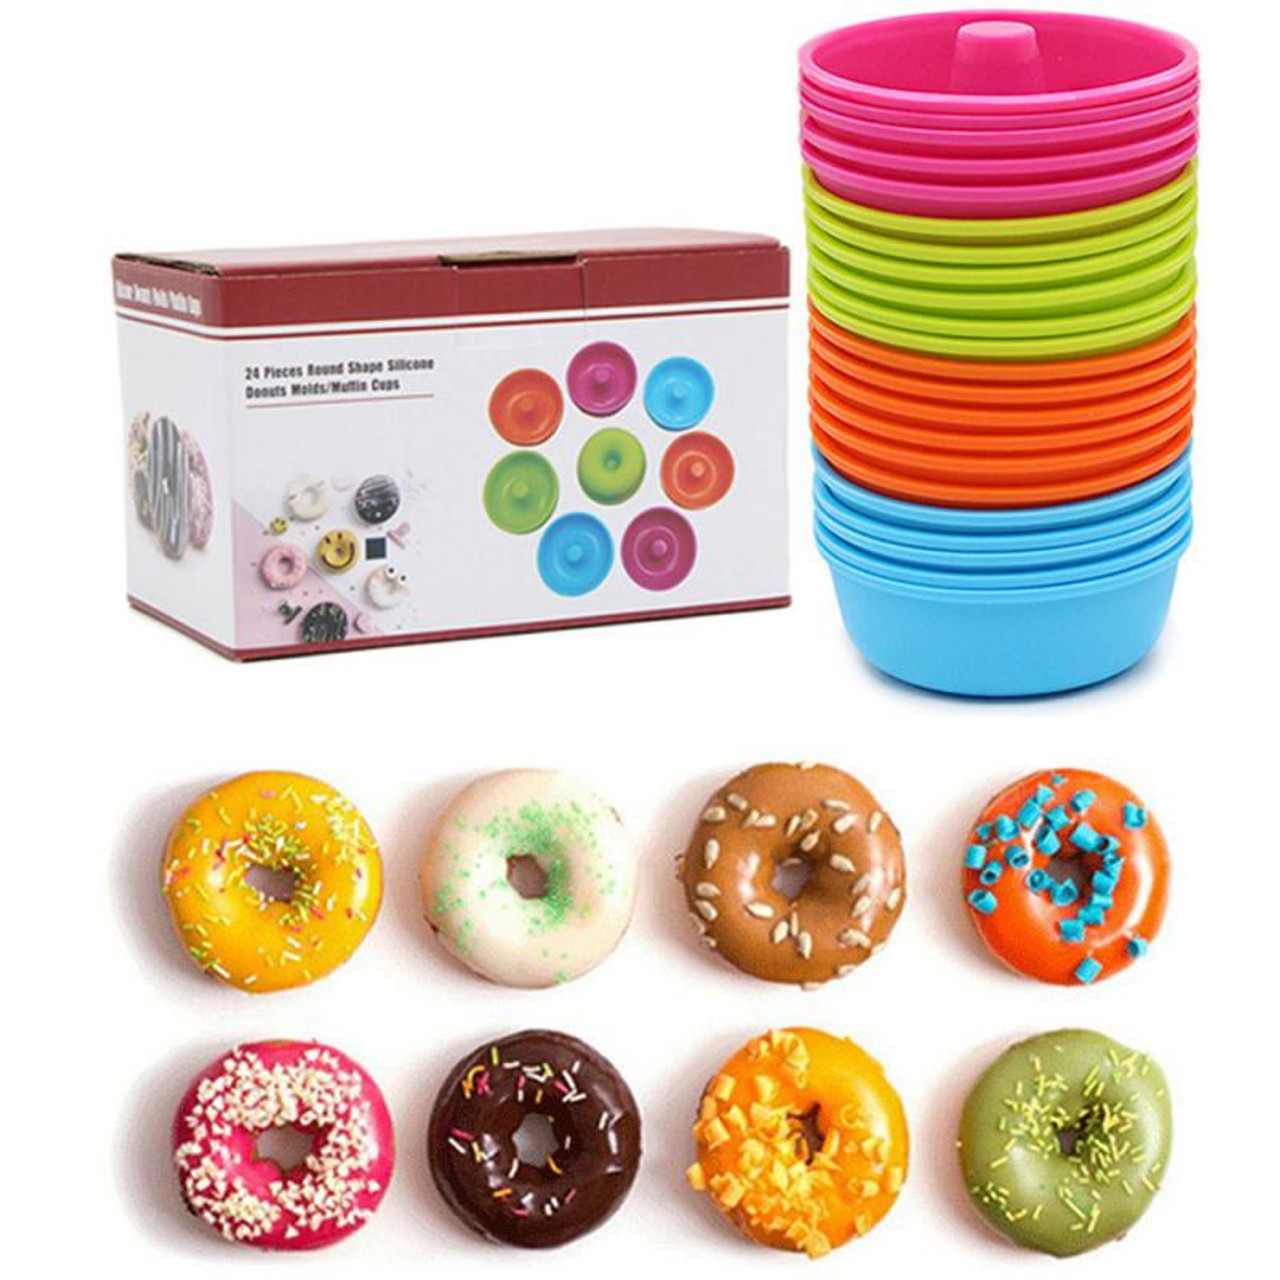 https://cdn11.bigcommerce.com/s-q7xwx9ggxf/images/stencil/1280x1280/products/591/4343/Silicone-Cake-Snack-Mold-24pcs-Silicone-Rainbow-Muffin-Cake-Cup-Baking-Donut-Dessert-Cake-Maker-Reusable__85290.1614473497.jpg?c=2